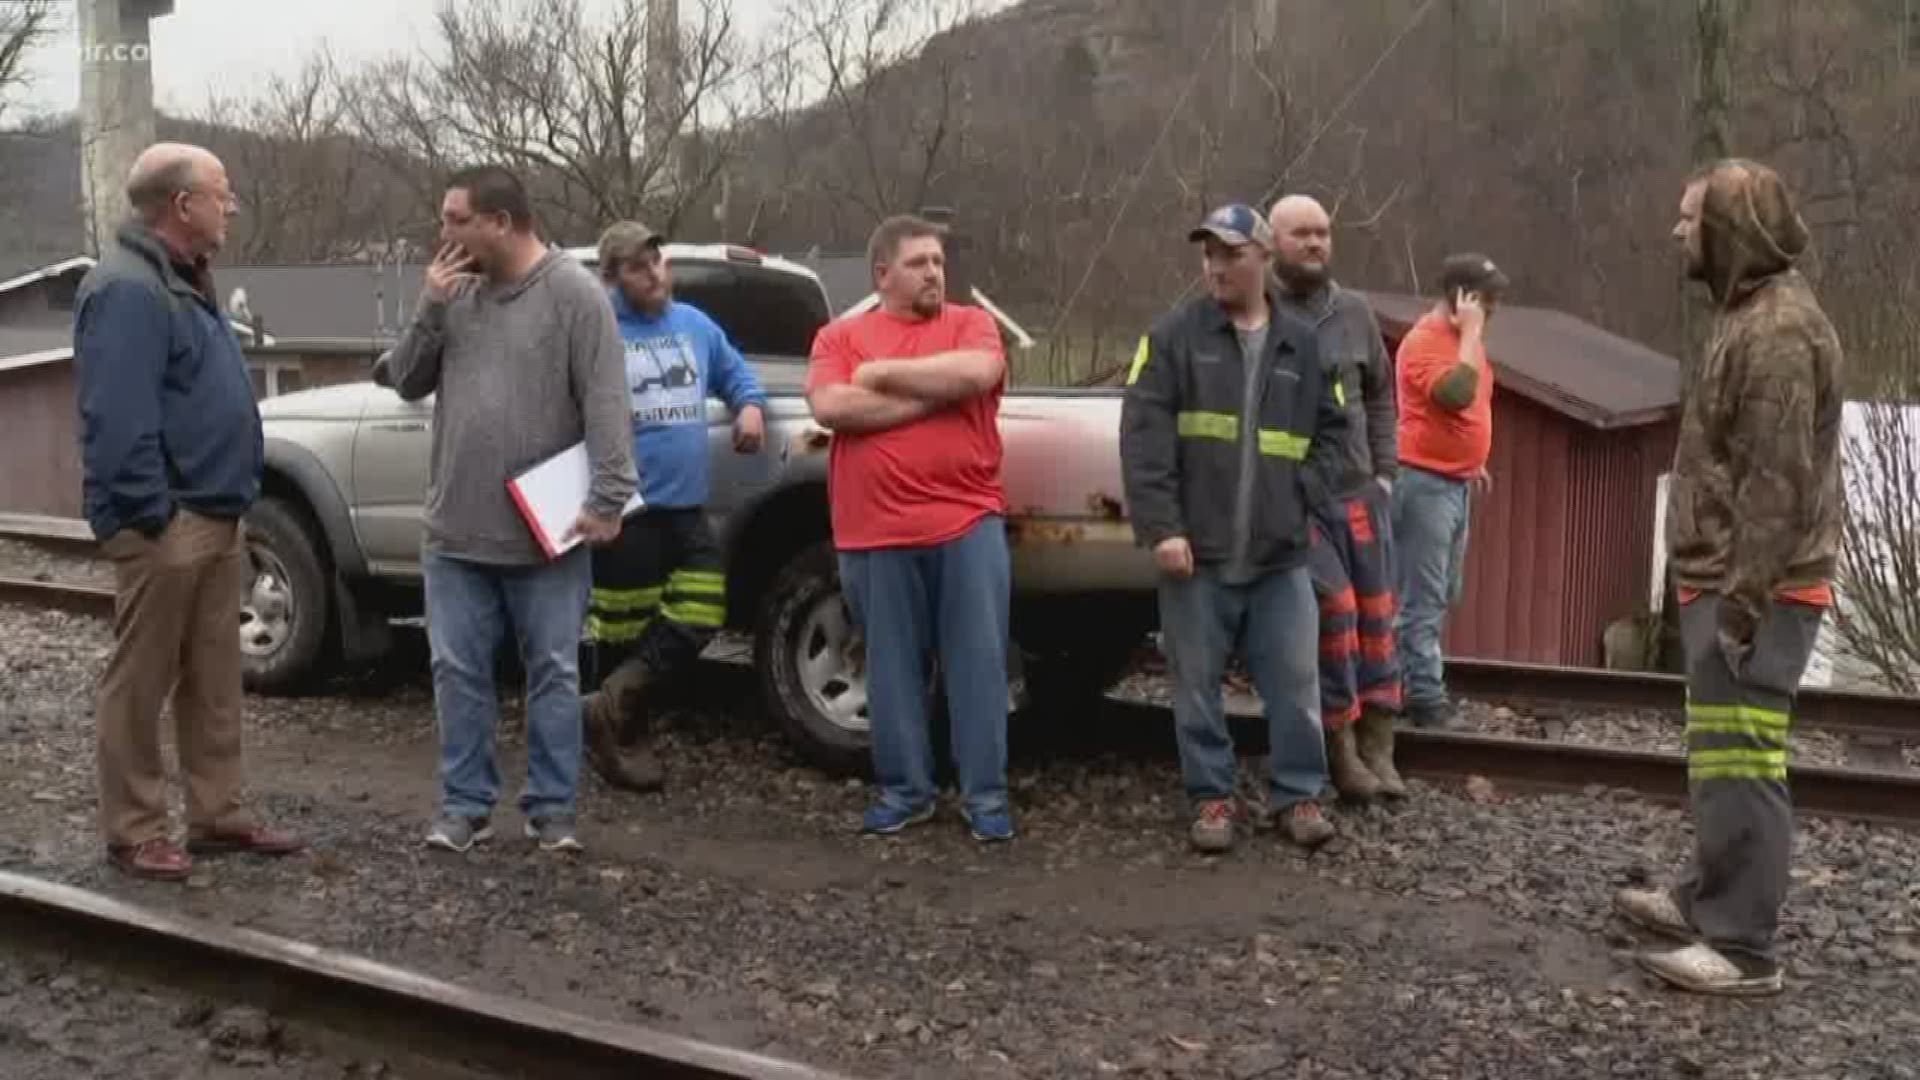 A mining protest in Kentucky ended after workers say they received their paychecks.